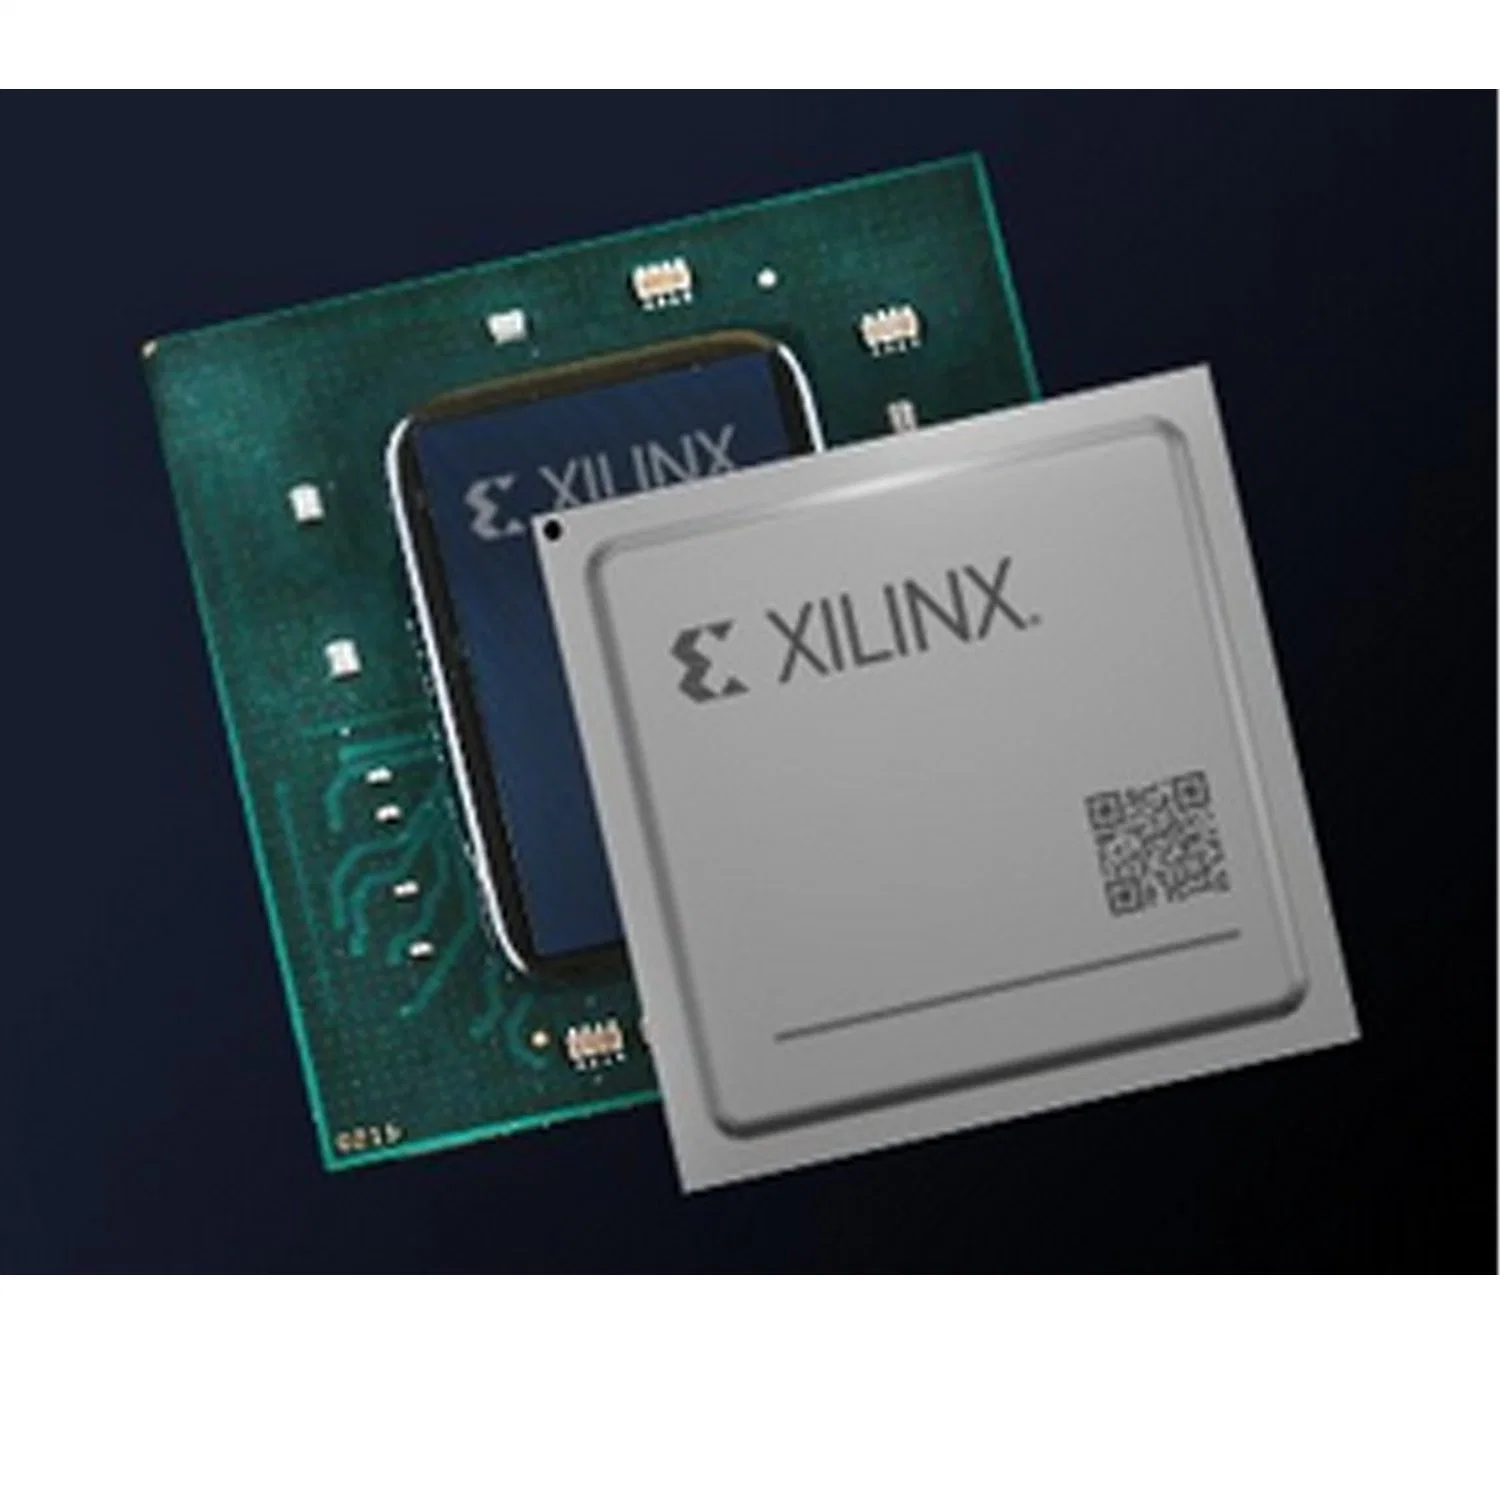 Xc7z020-1clg484I4493 New Original Electronic Components Integrated Circuits Xilinx Epga Any Bom We Can Supply